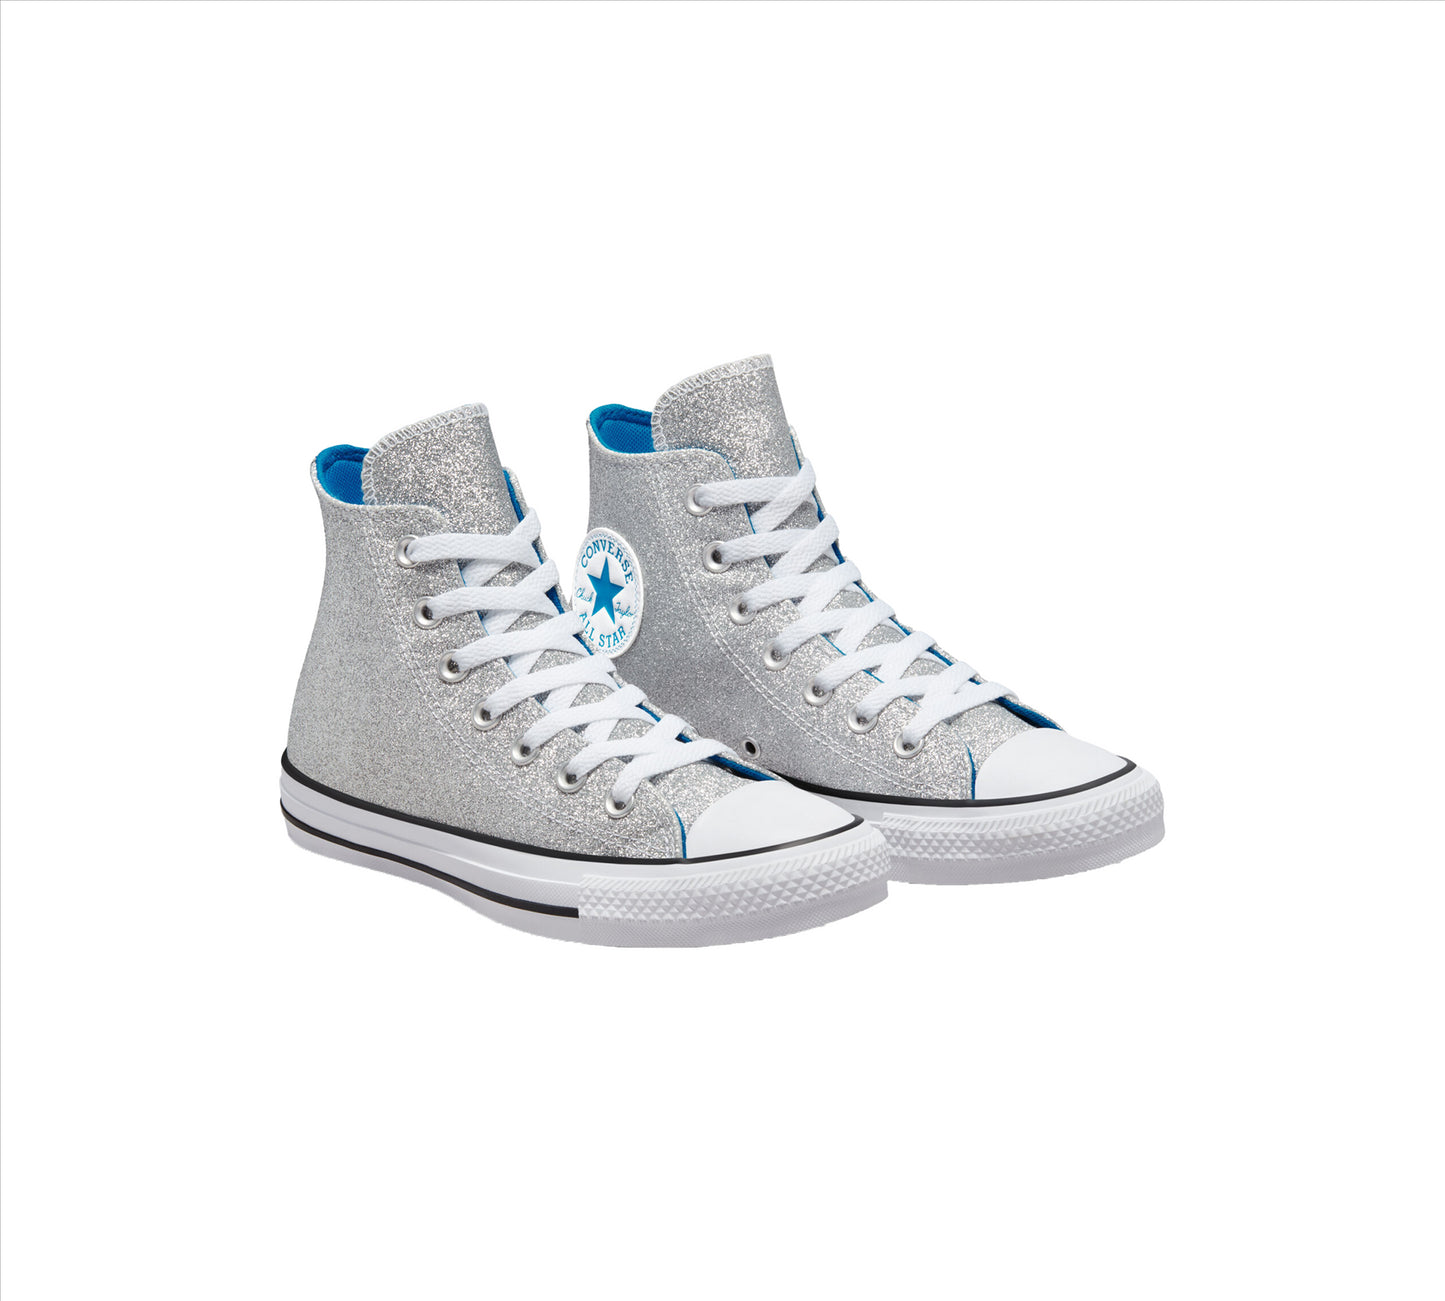 Converse Authentic Glam Chuck Taylor All Star Schuhe